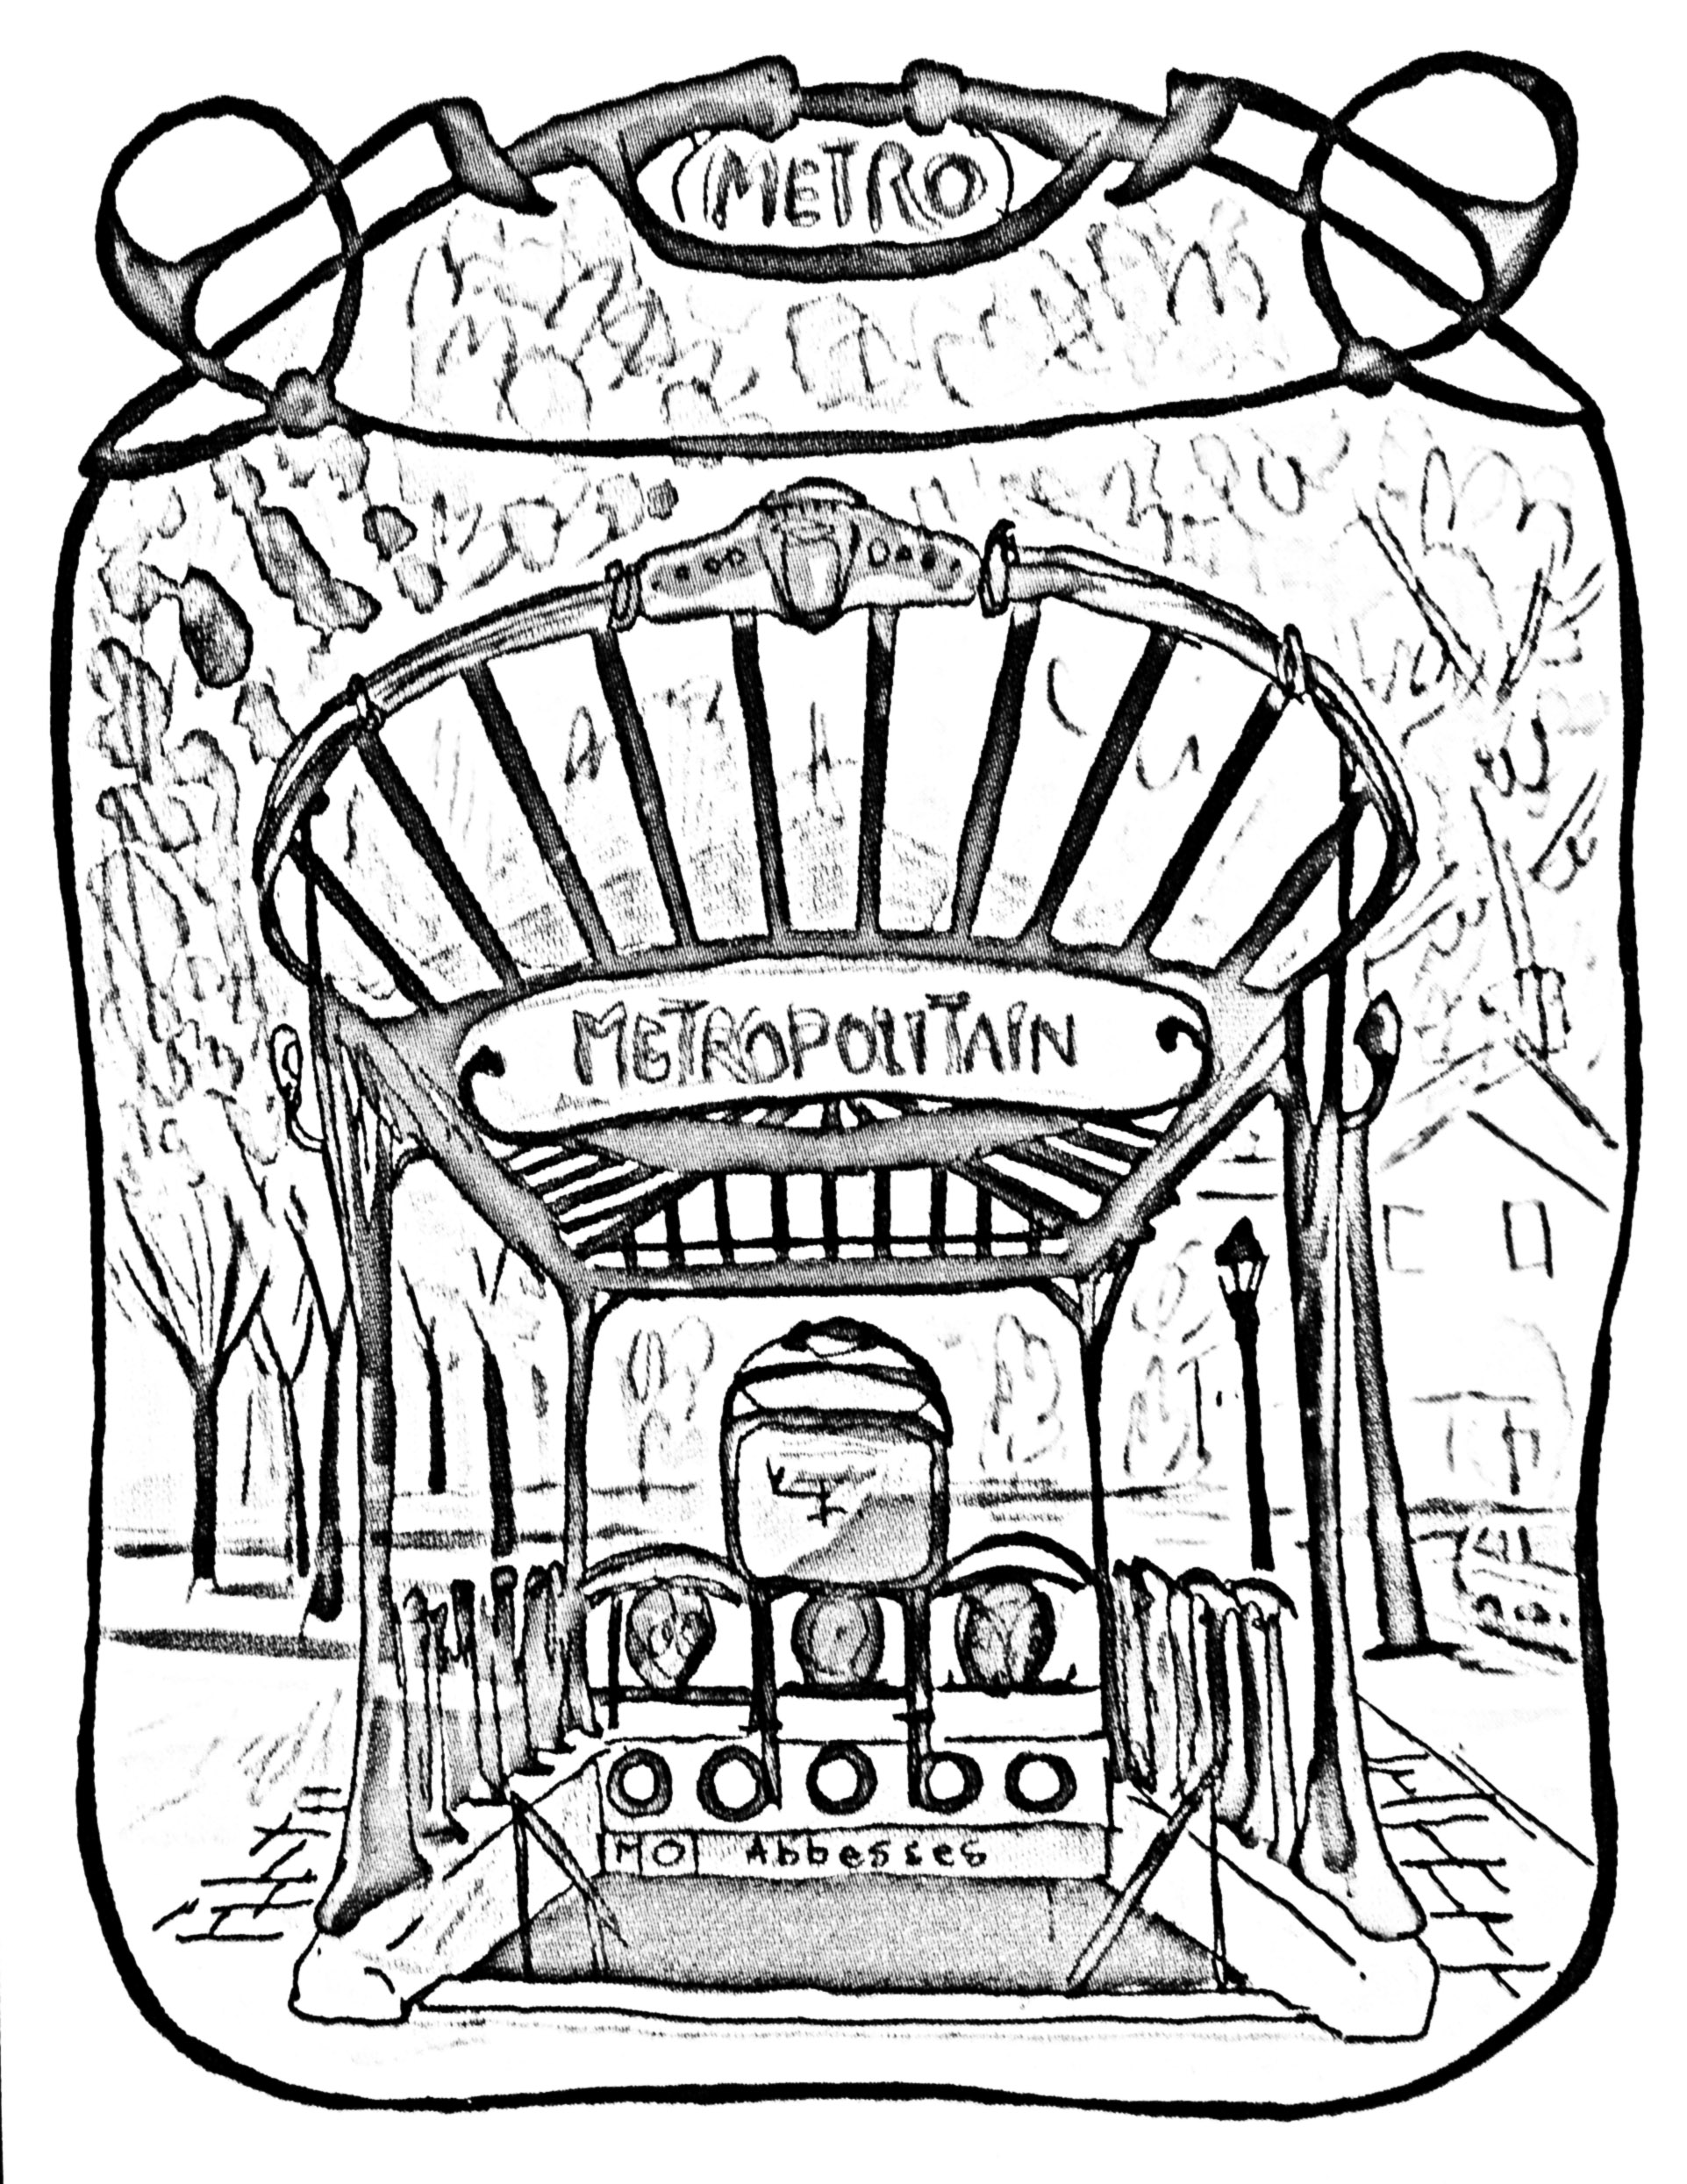 Drawing to color of an entrance gate to Paris Subway ('Metropolitain')